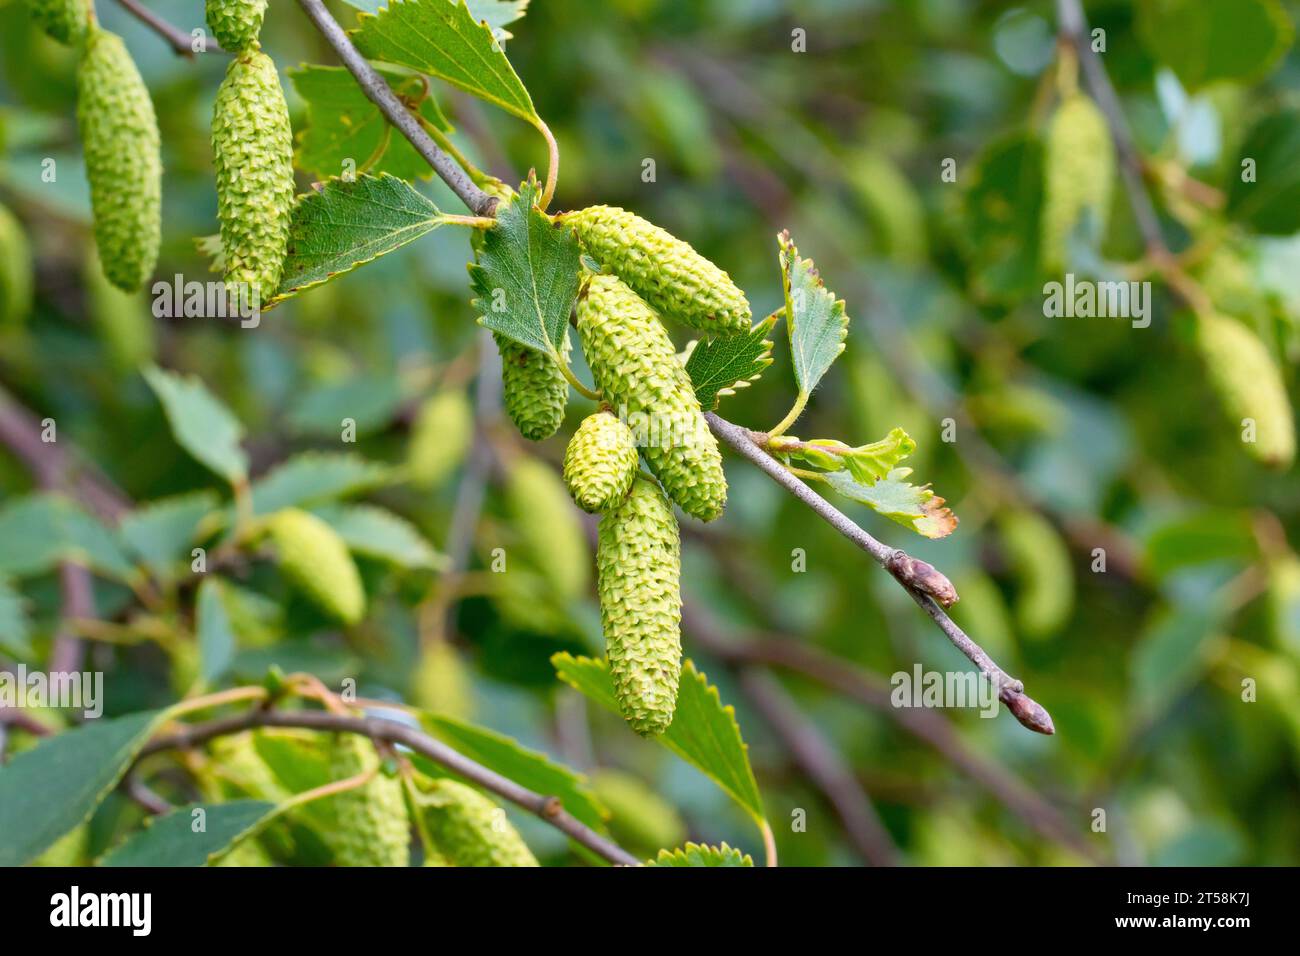 Silver Birch (betula pendula), close up of a branch of the common tree showing the developing seedpods or catkins. Stock Photo